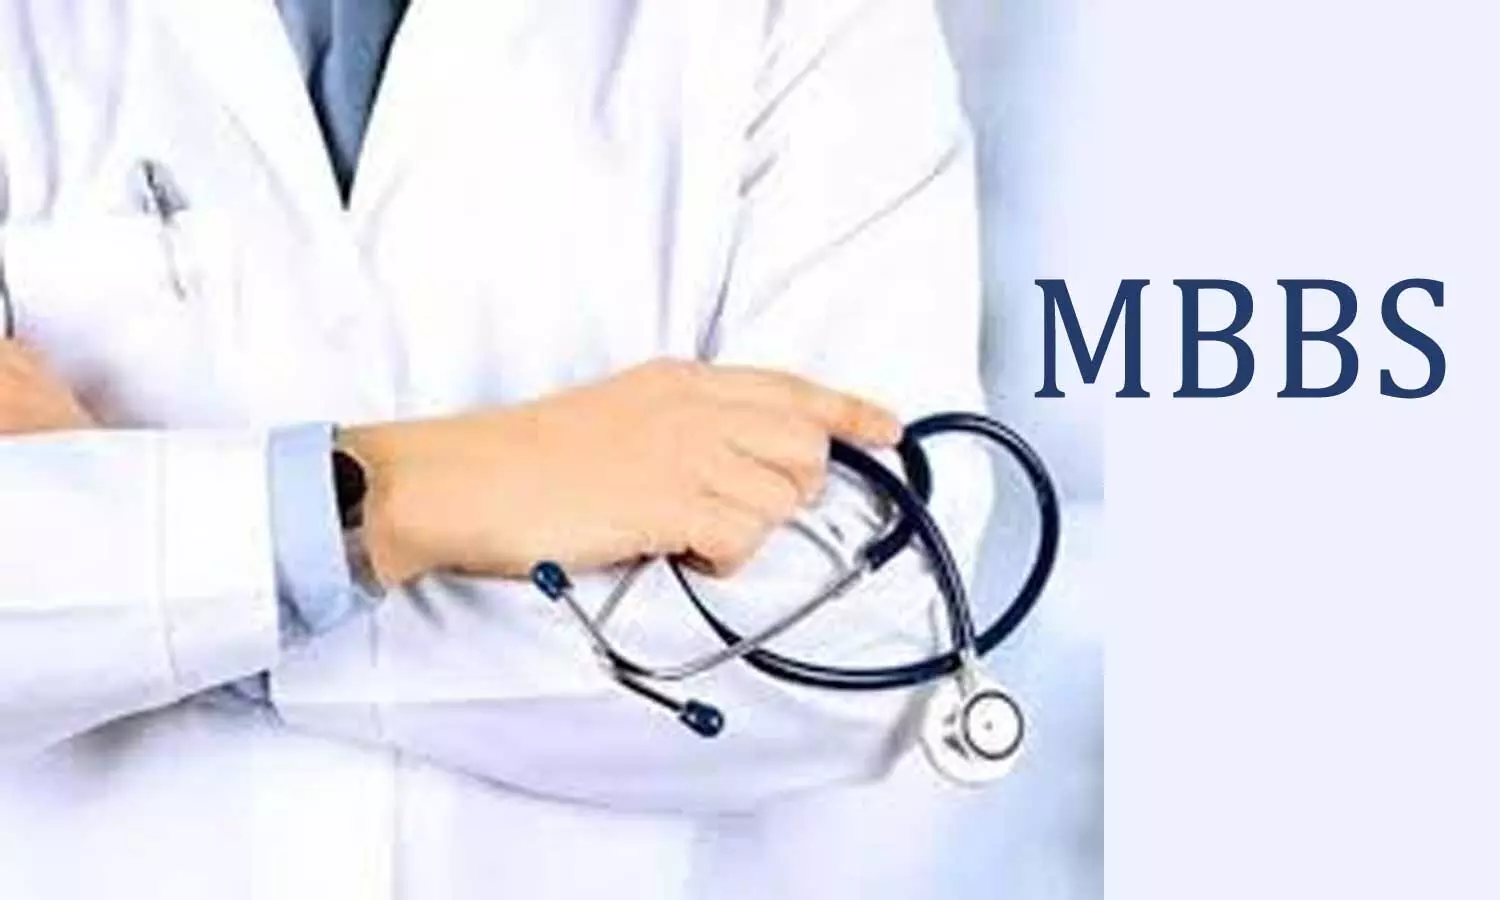 30 more MBBS seats added to Round 1 Counselling Session: MCC issues notice